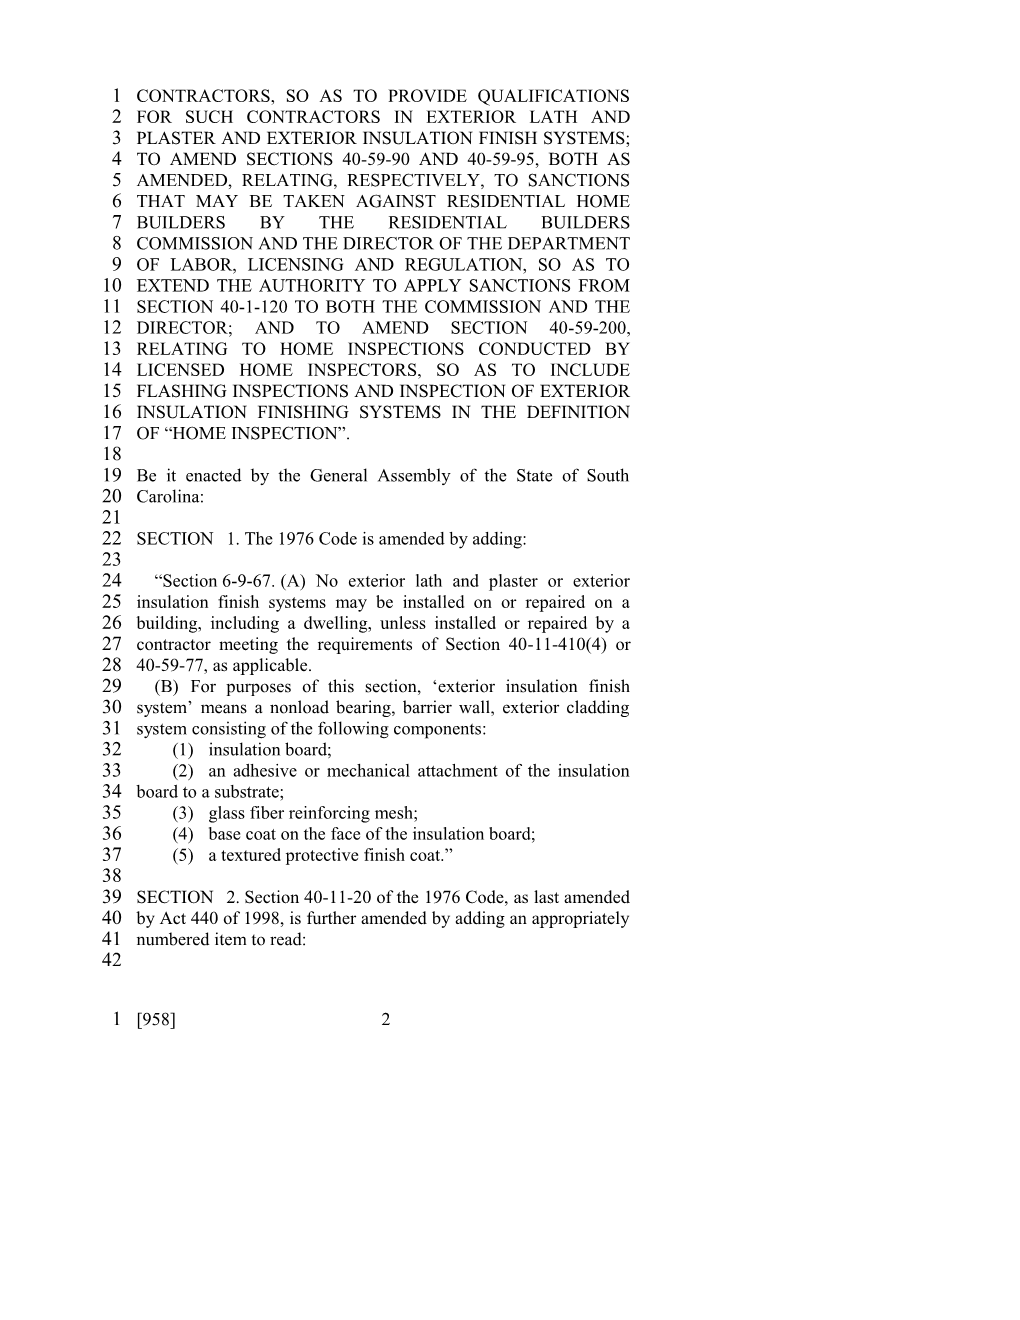 2001-2002 Bill 958: Contractors License Classifications, Residential Home Builders, Home